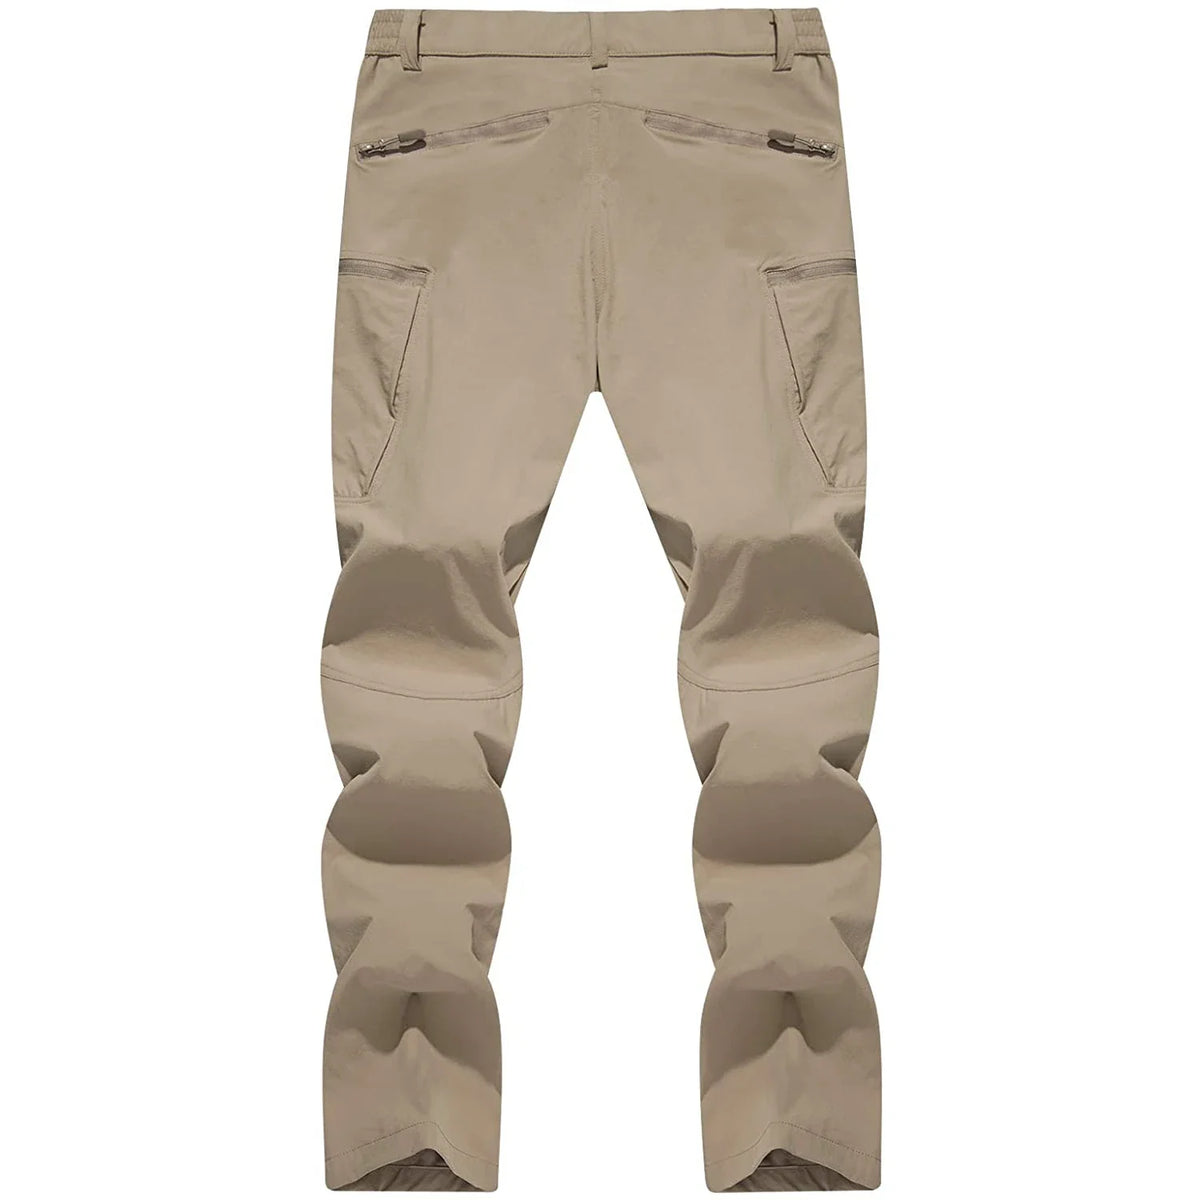 DryCamp Tactical Trousers